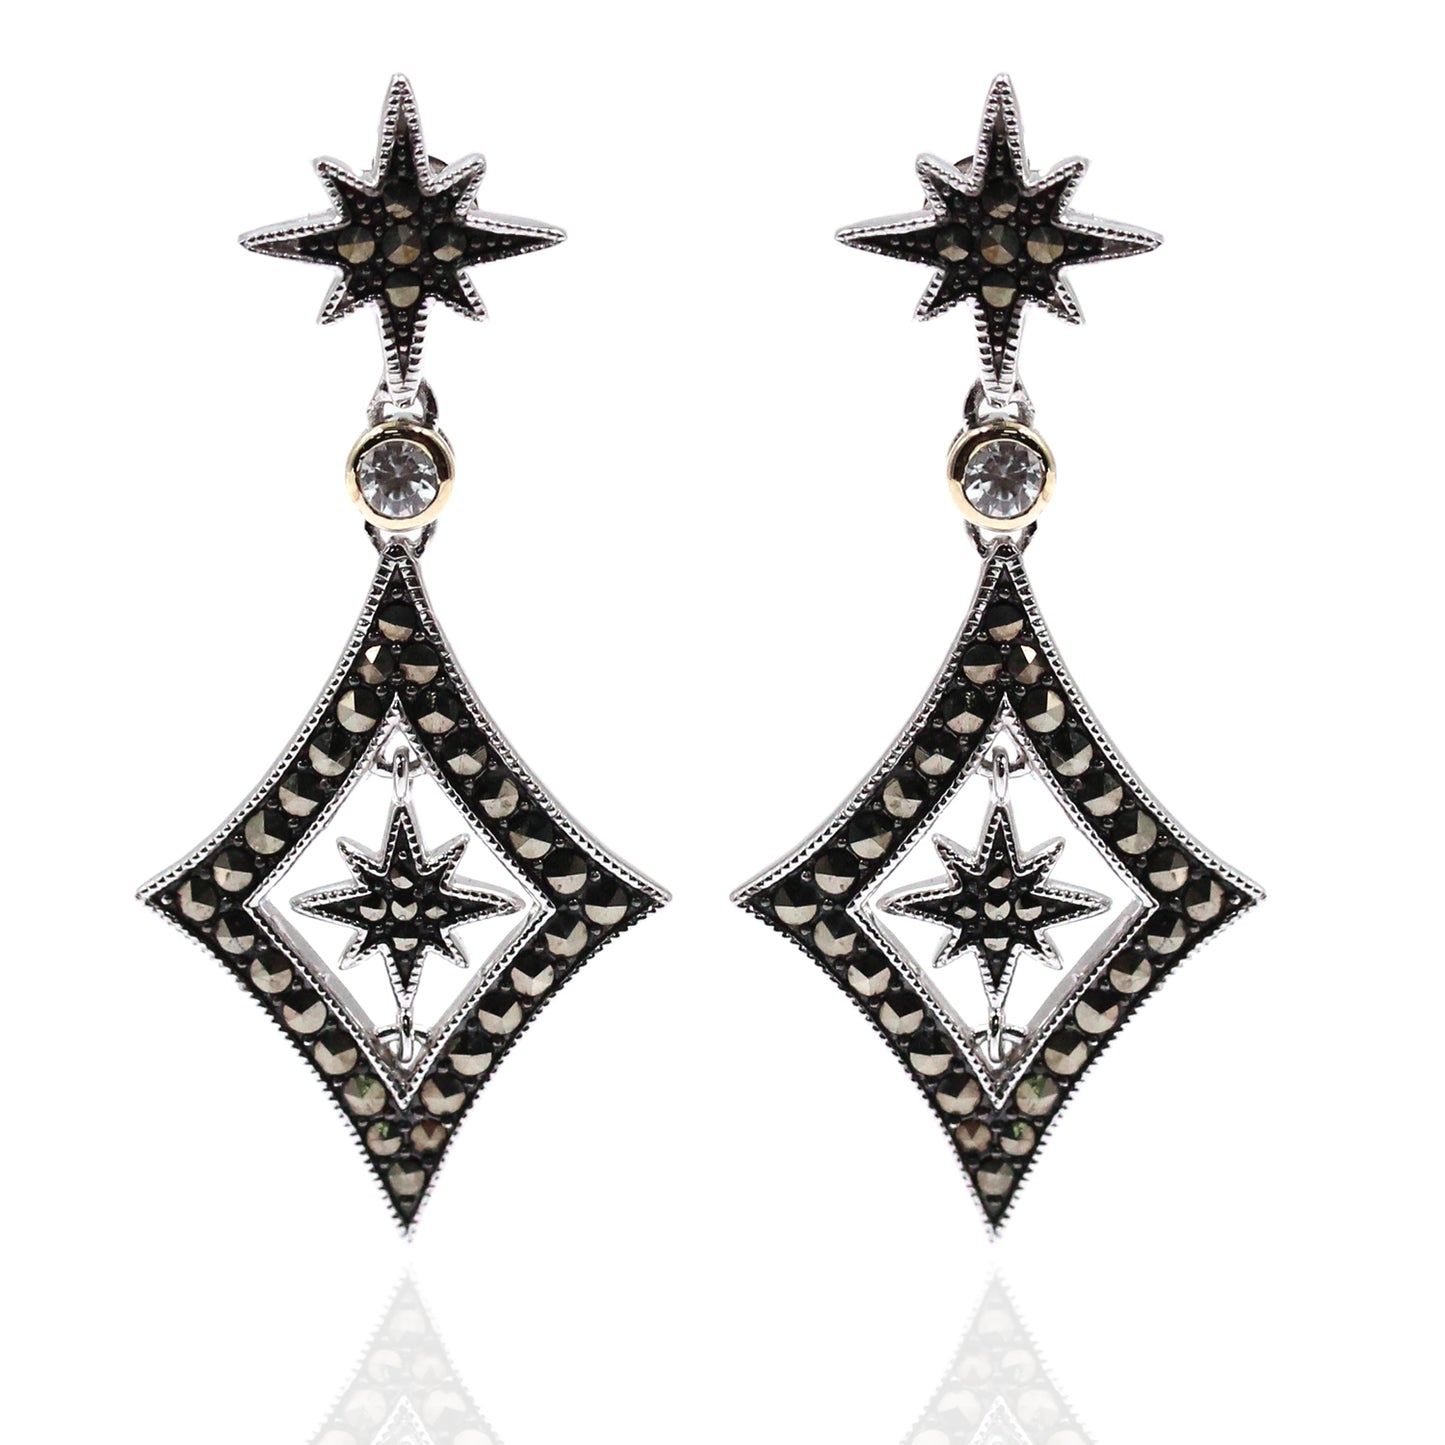 14K Gold & Strling Sillver With Zircon, Marcasite Earrings